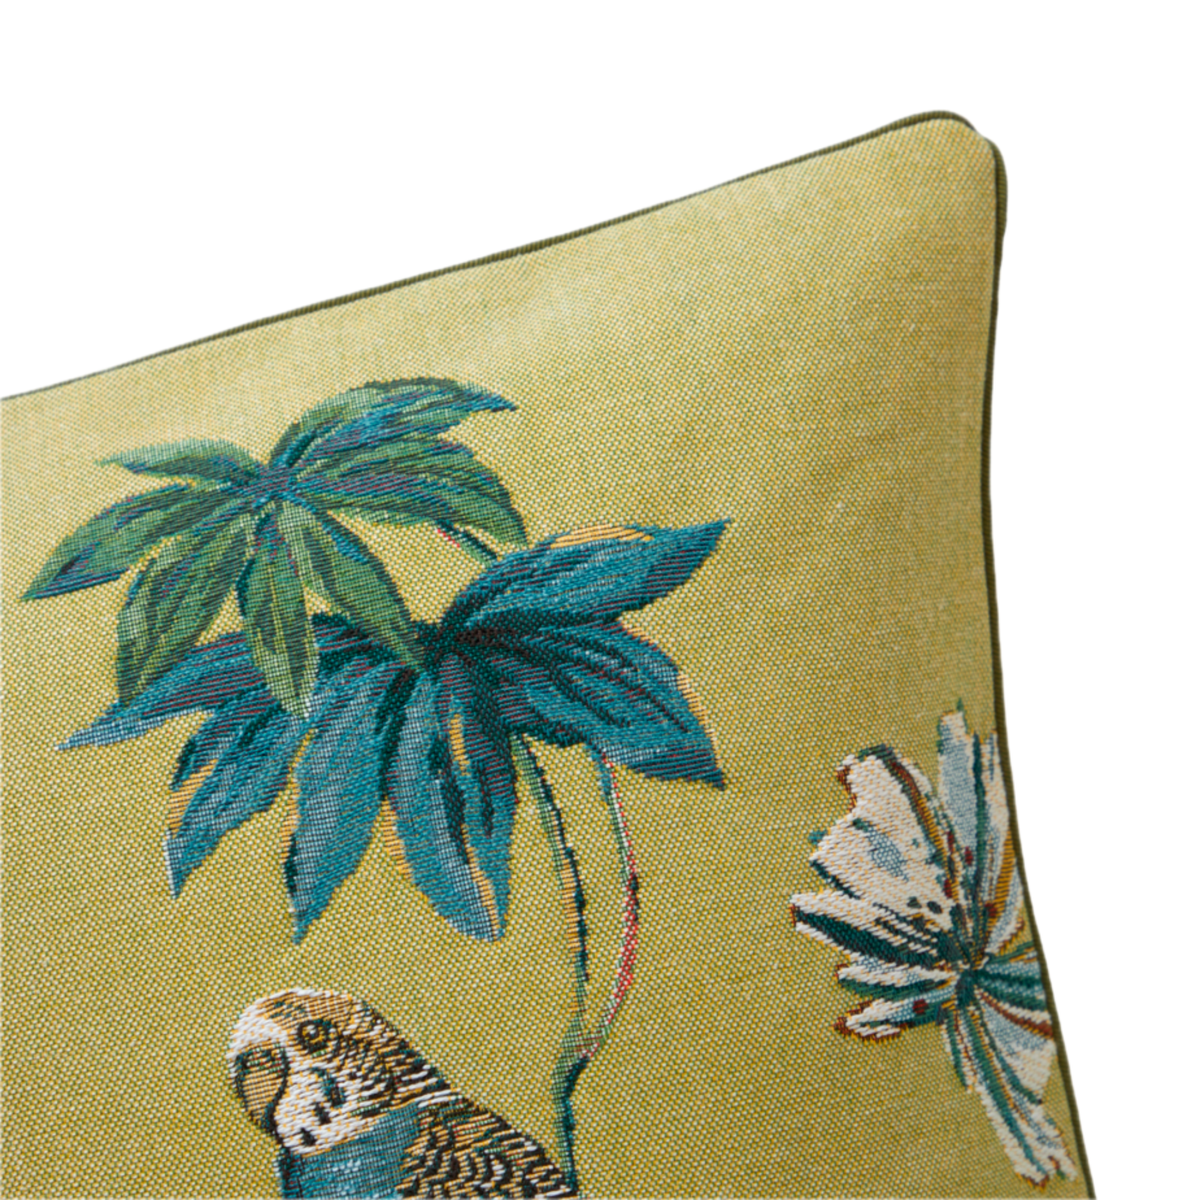 Corner of Decorative Pillow of Yves Delorme Tropical Bedding in Avocat Color